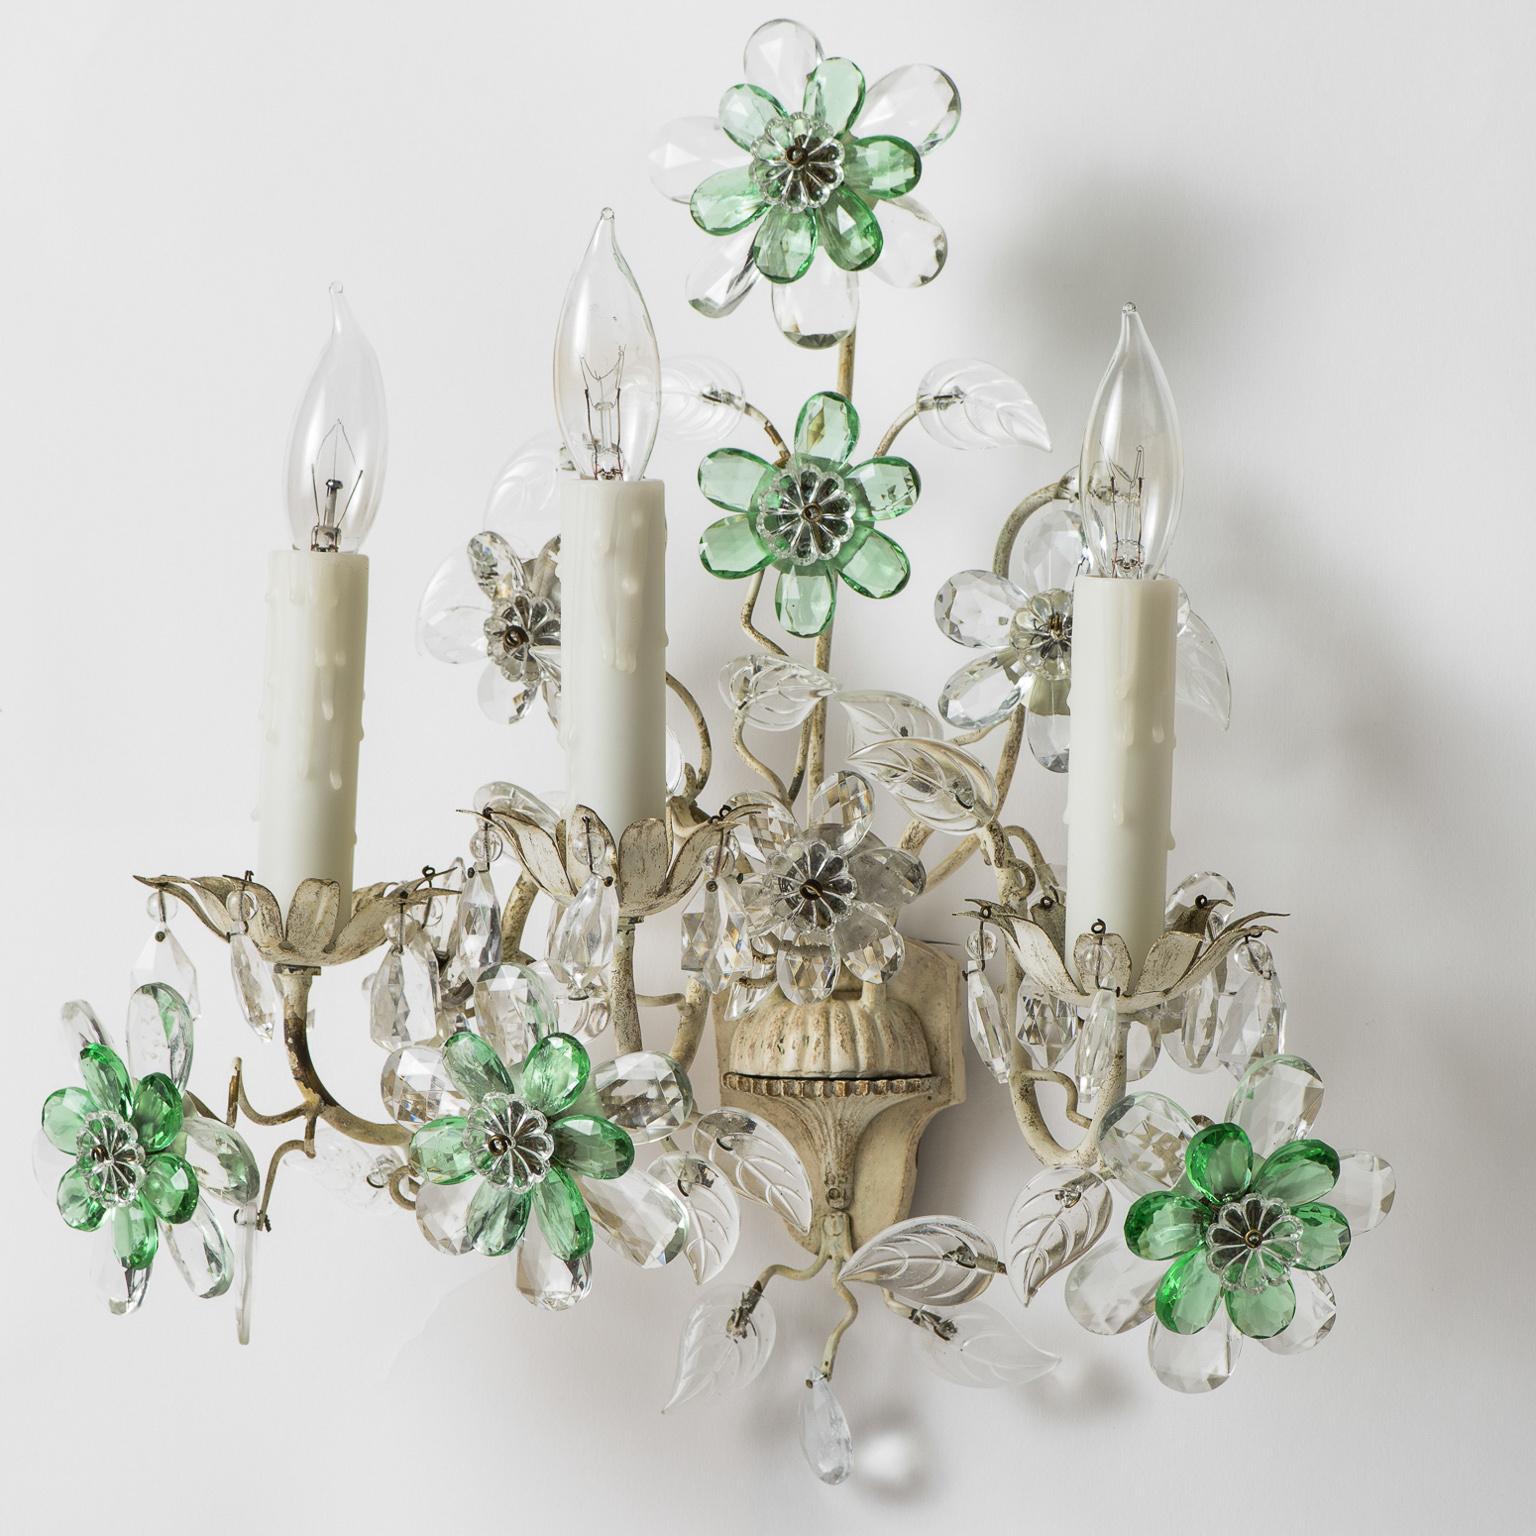 These charming three-light sconces featuring a white painted metal center urn and three arms ending in crystal flowers. The crystals are an unusual combination of clear and pale green giving them a light and airy feel. They have been recently